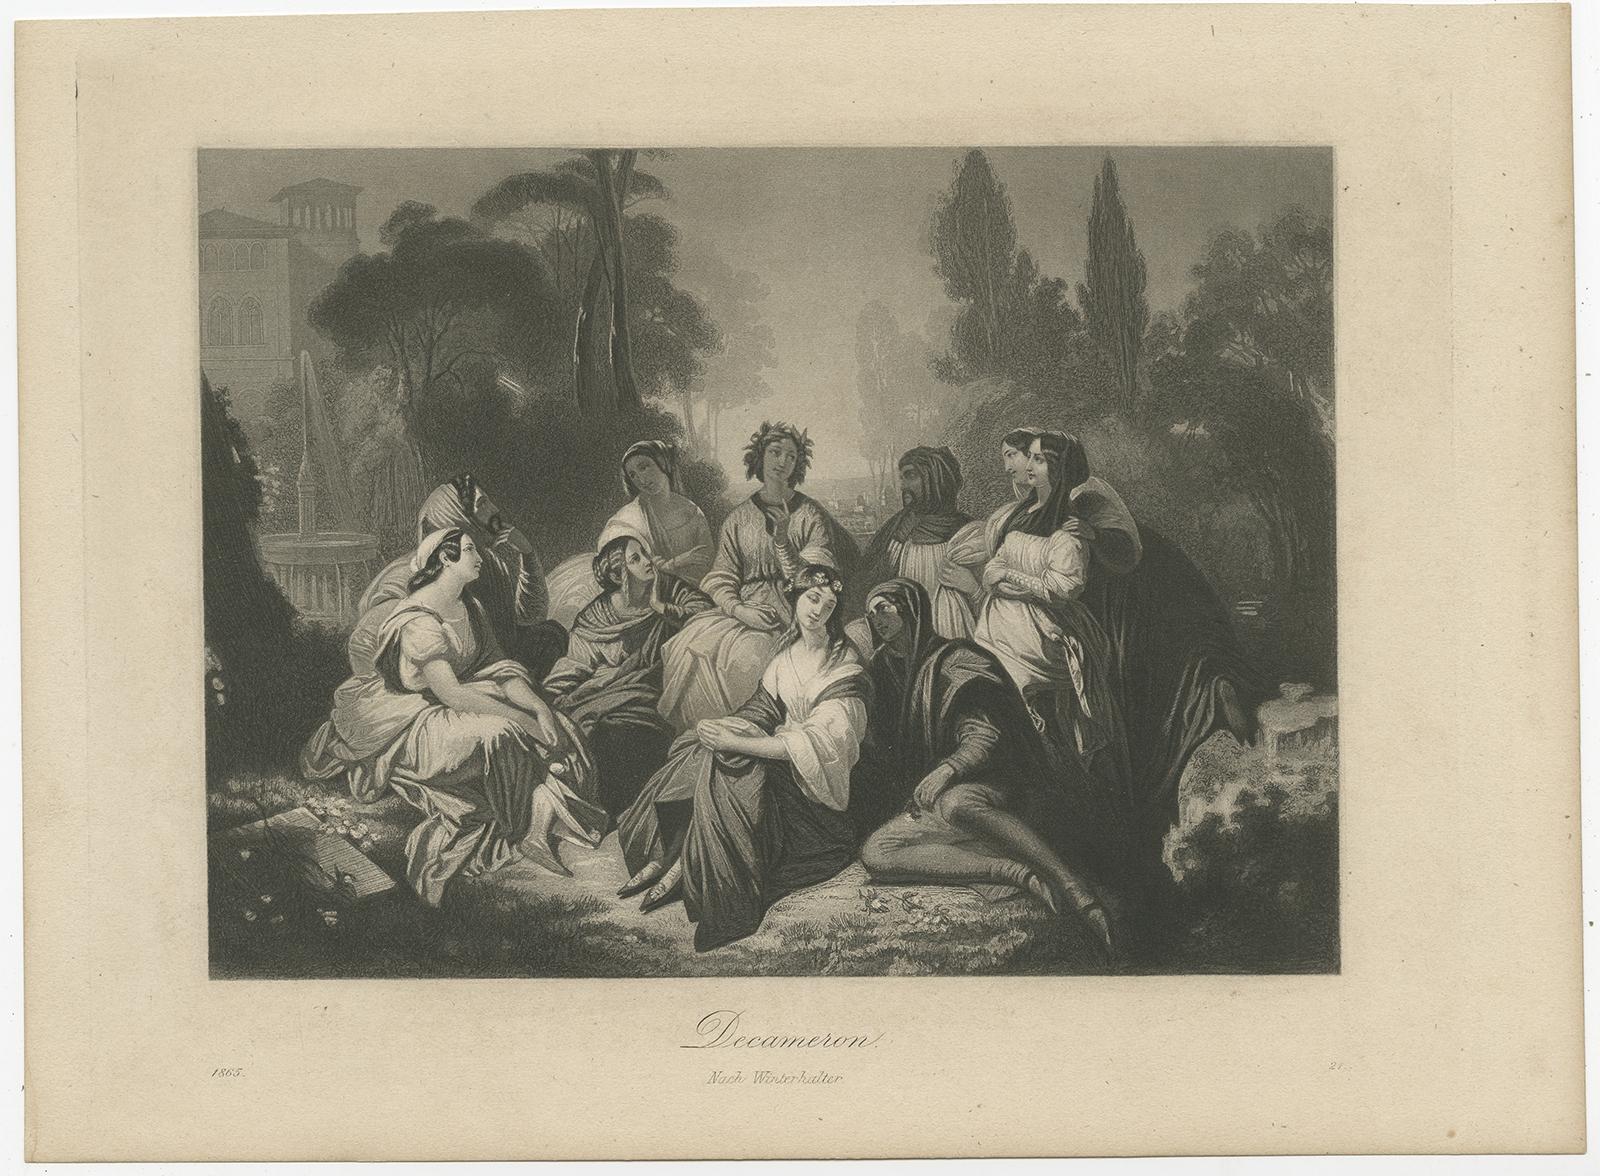 Antique print titled 'Decameron'. Steel engraving made after the original painting by Franz Xaver Winterhalter. Source unknown, to be determined. 

Artists and Engravers: Anonymous. 
The Decameron or Decamerone is a collection of novellas by the